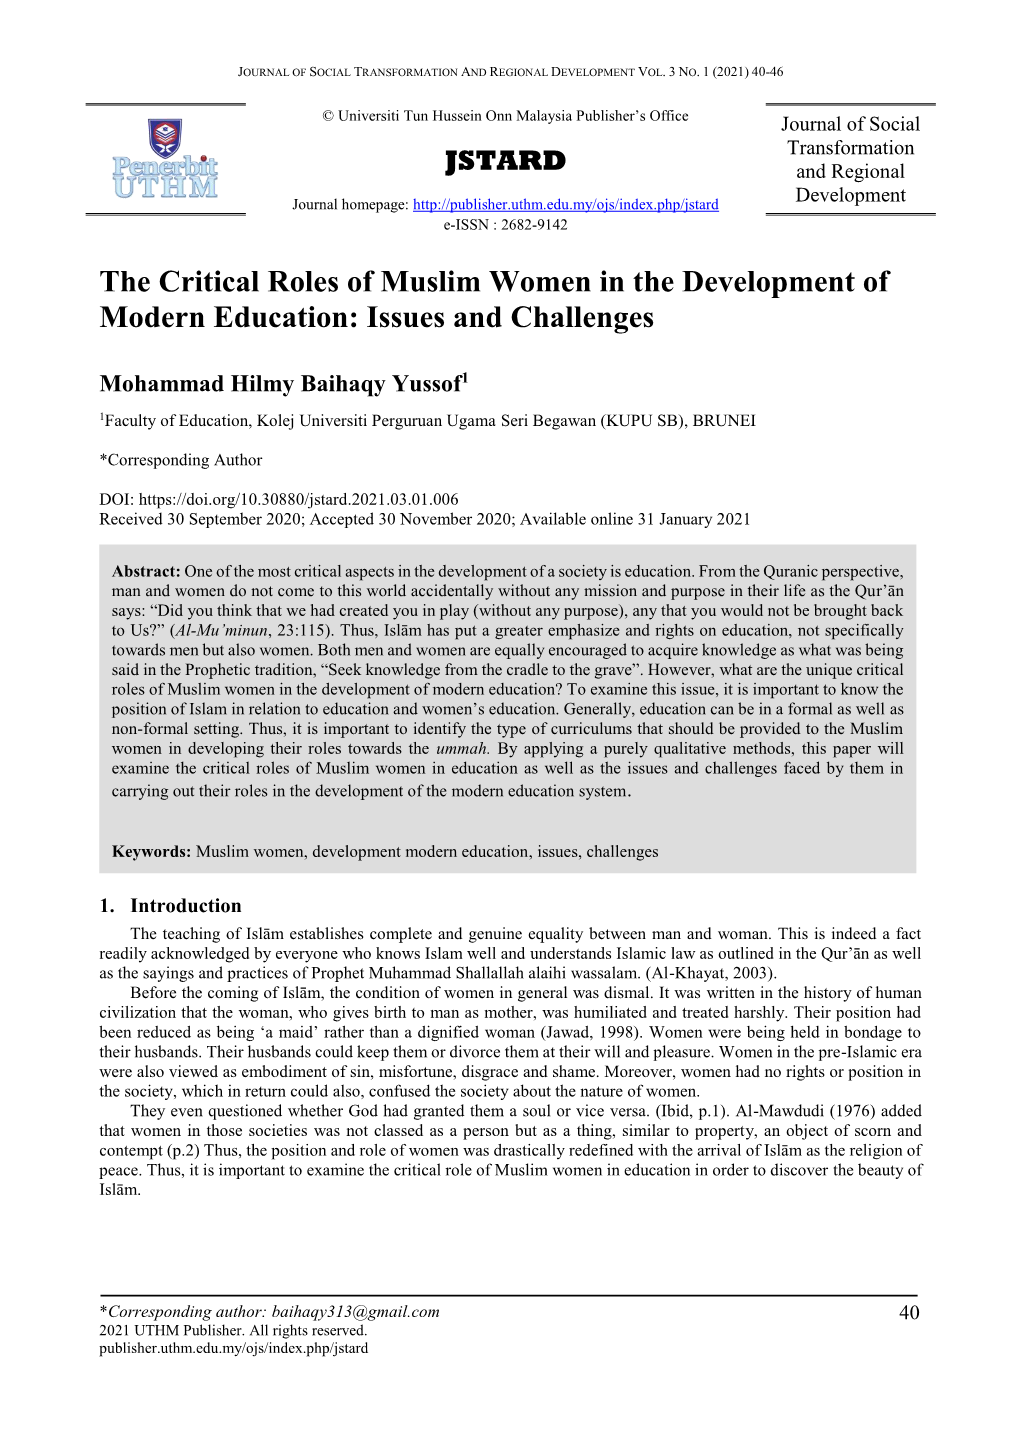 The Critical Roles of Muslim Women in the Development of Modern Education: Issues and Challenges